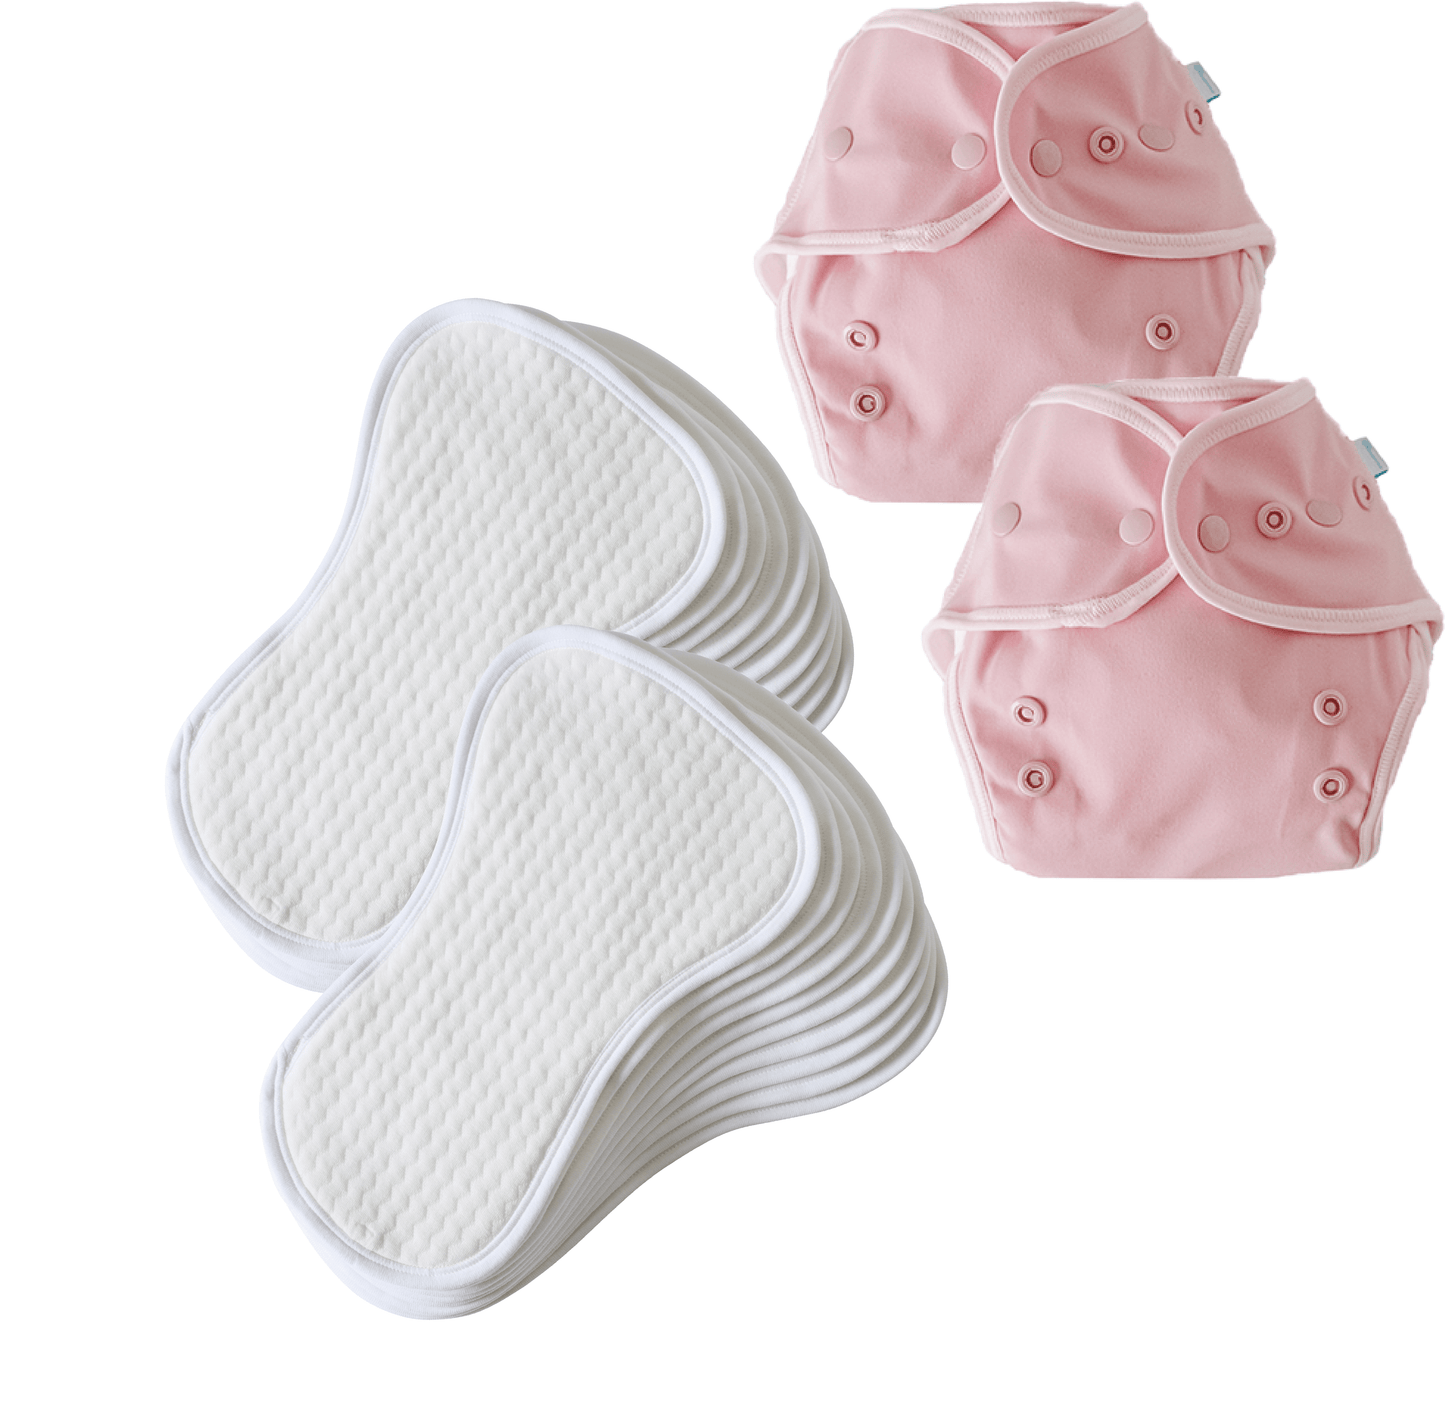 [Daytime diaper set] 20 cloth diapers (molded diapers) + 2 diaper covers